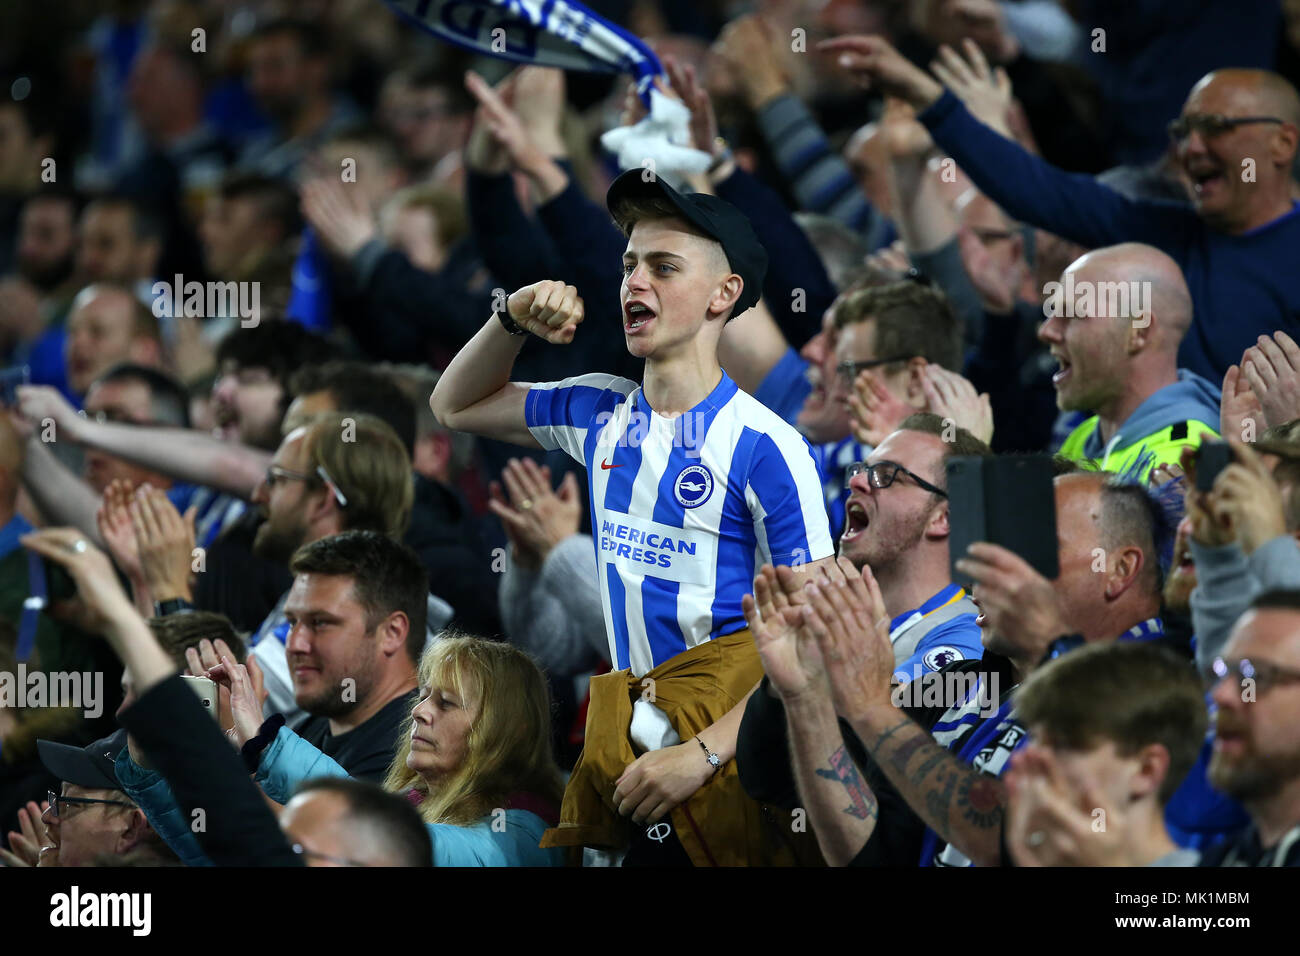 Brighton fans celebrate victory after  the Premier League match between Brighton and Hove Albion and Manchester United at the American Express Community Stadium in Brighton and Hove. 04 May 2018 *** EDITORIAL USE ONLY ***  No merchandising. For Football images FA and Premier League restrictions apply inc. no internet/mobile usage without FAPL license - for details contact Football Dataco Stock Photo